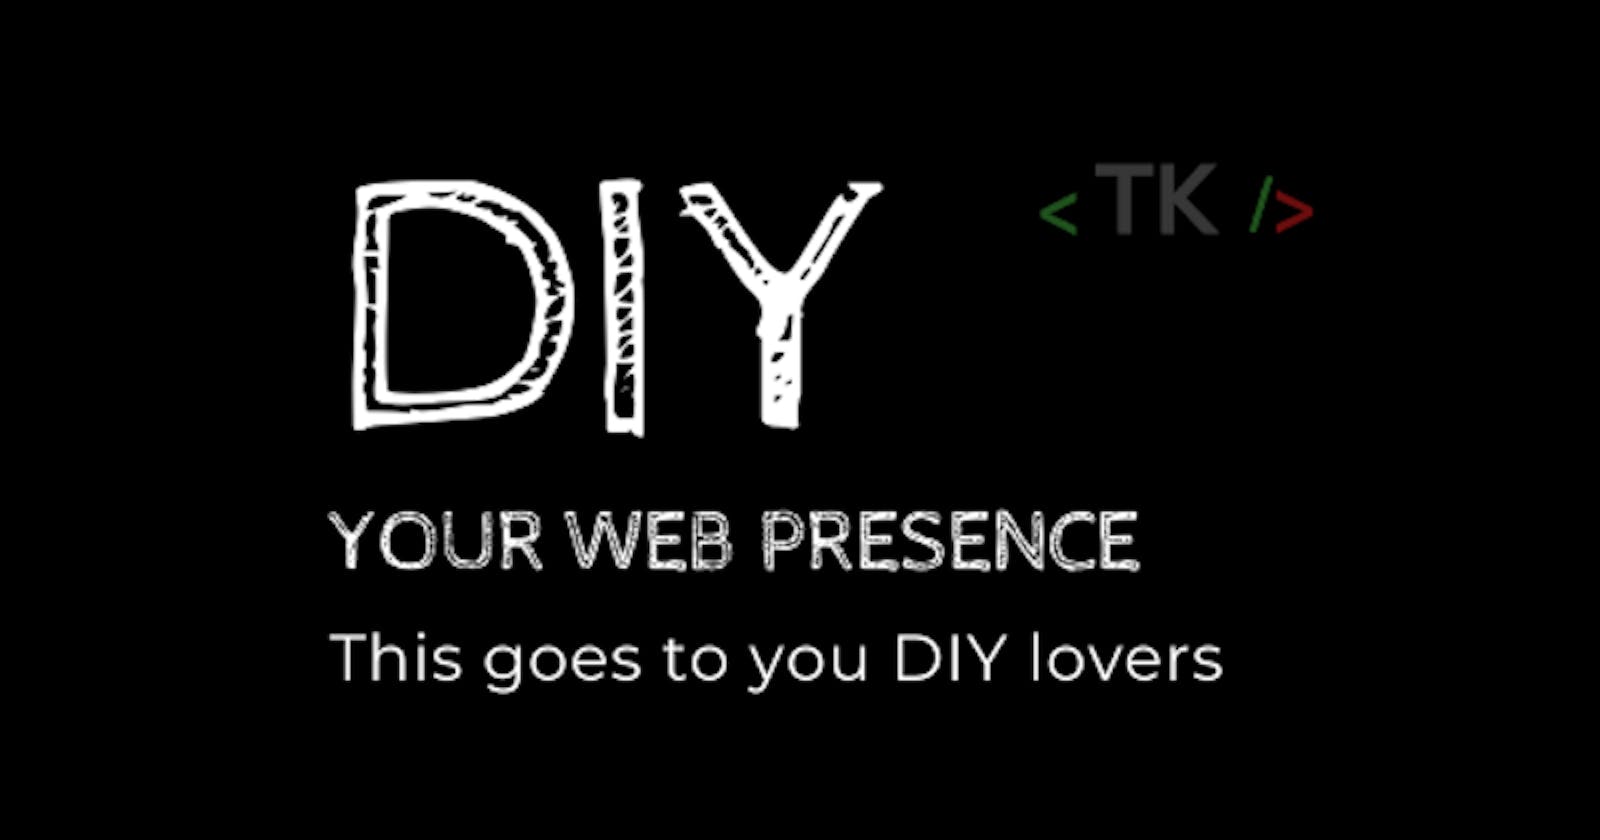 2. #DIY your web presence | The internet and domain names